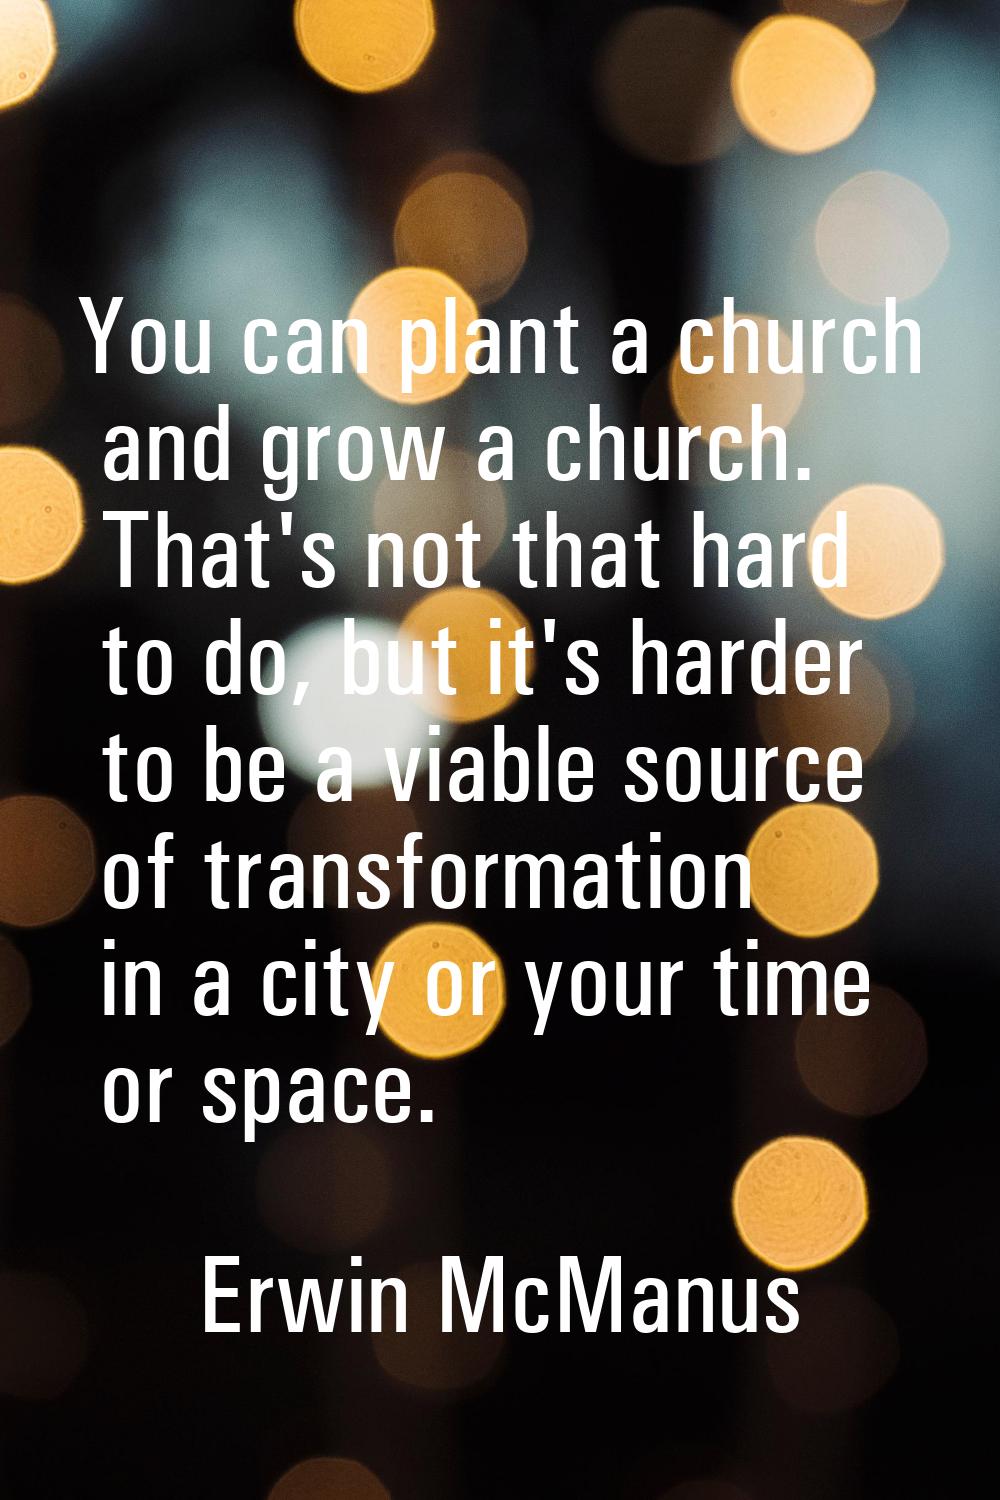 You can plant a church and grow a church. That's not that hard to do, but it's harder to be a viabl